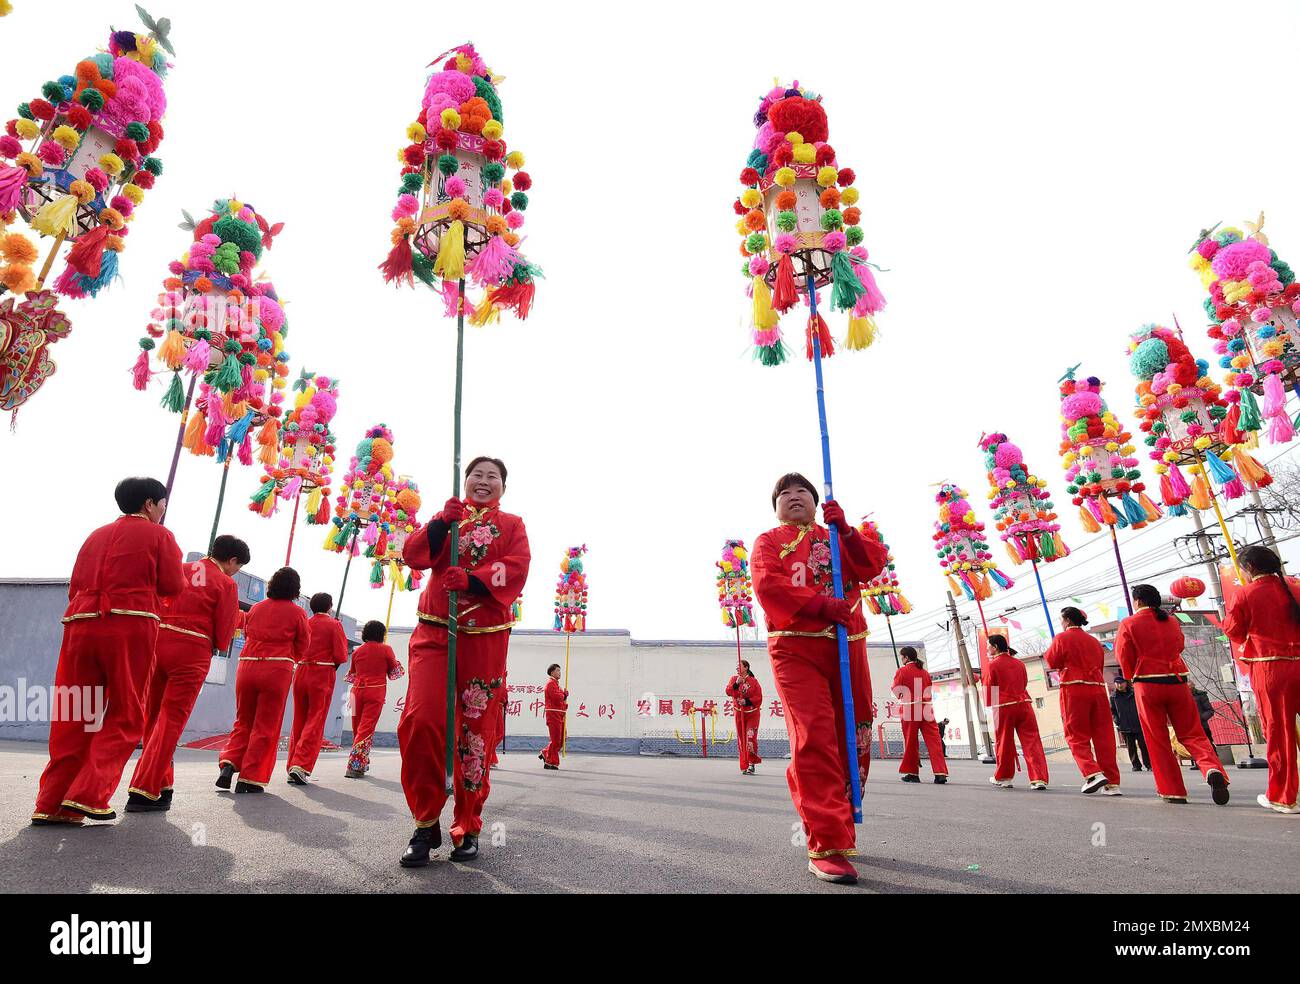 HANDAN, CHINA - FEBRUARY 3, 2023 - Villagers perform the intangible cultural heritage "Weizi Lantern Array" to celebrate the Lantern Festival in Handa Stock Photo